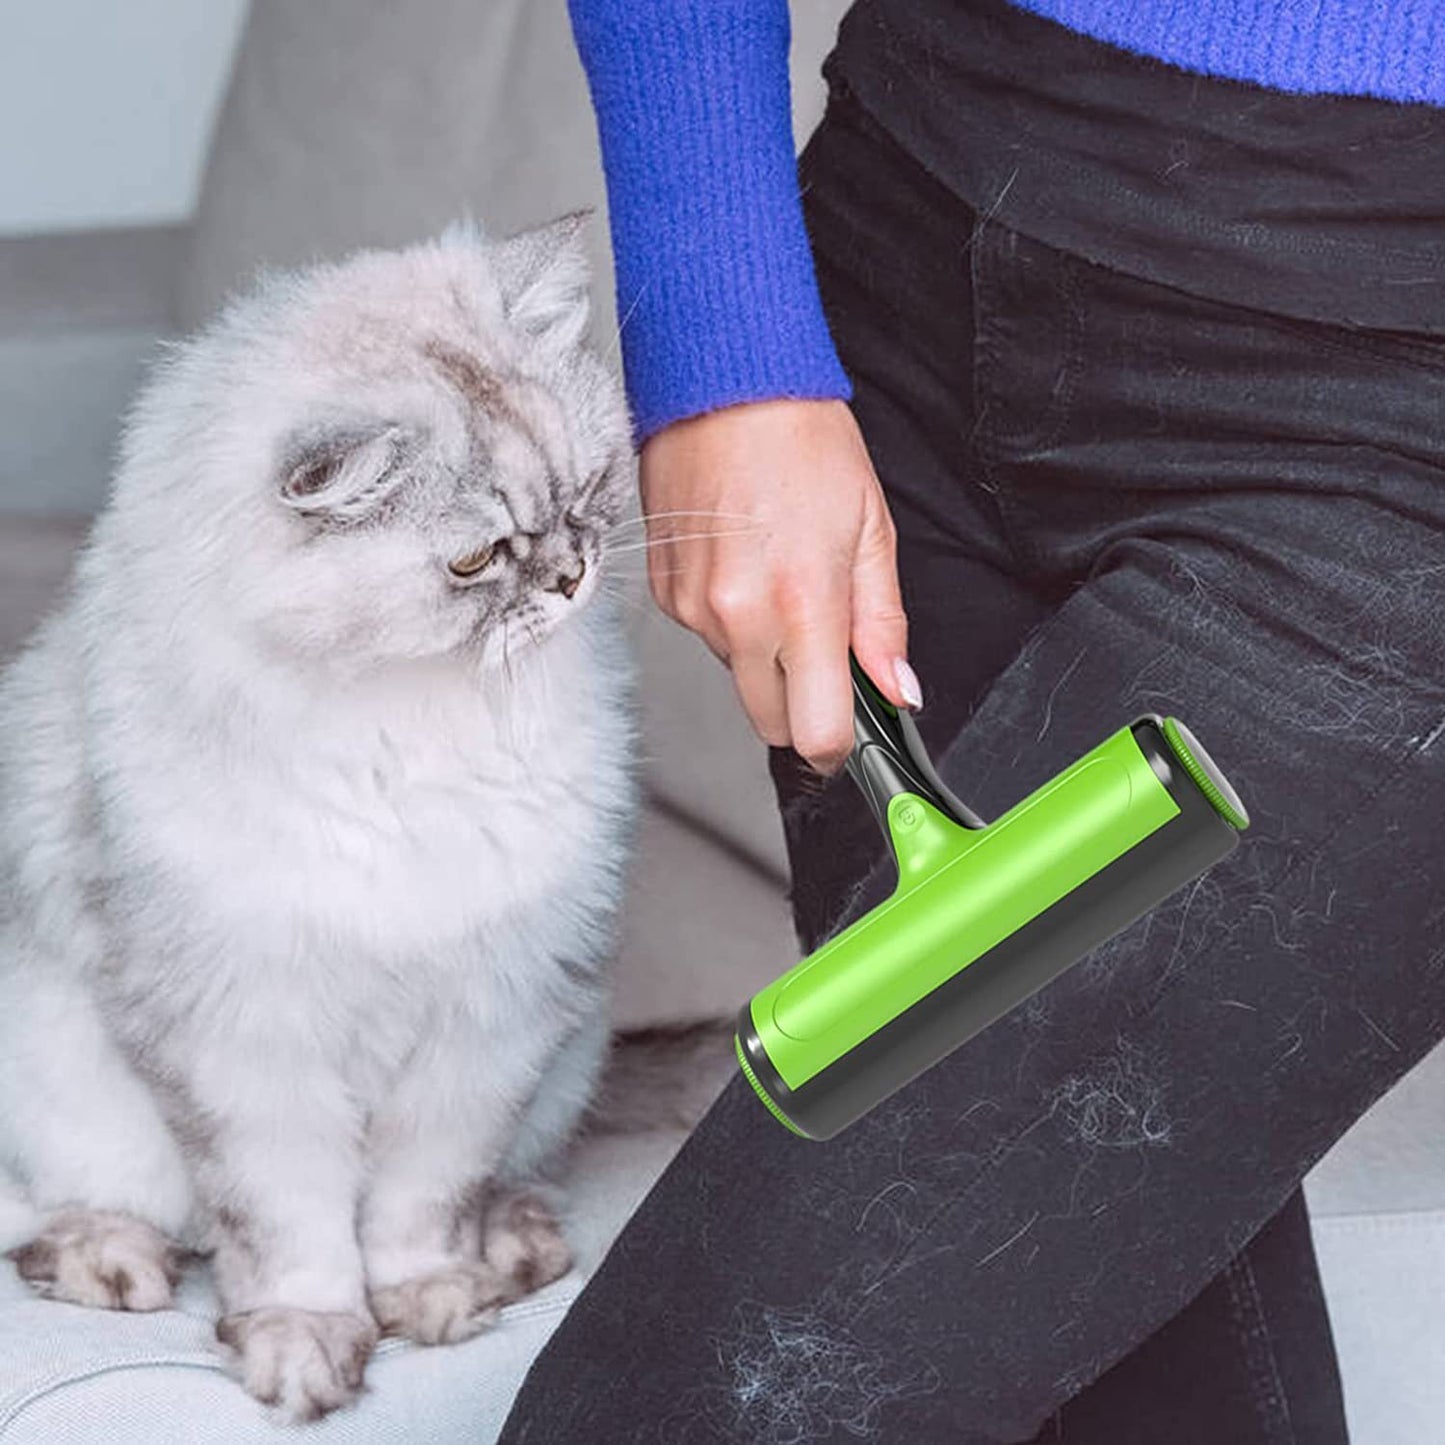 "Effortless Fur Removal: Green Pet Hair Brush for Cats & Dogs - Perfect for All Surfaces!"